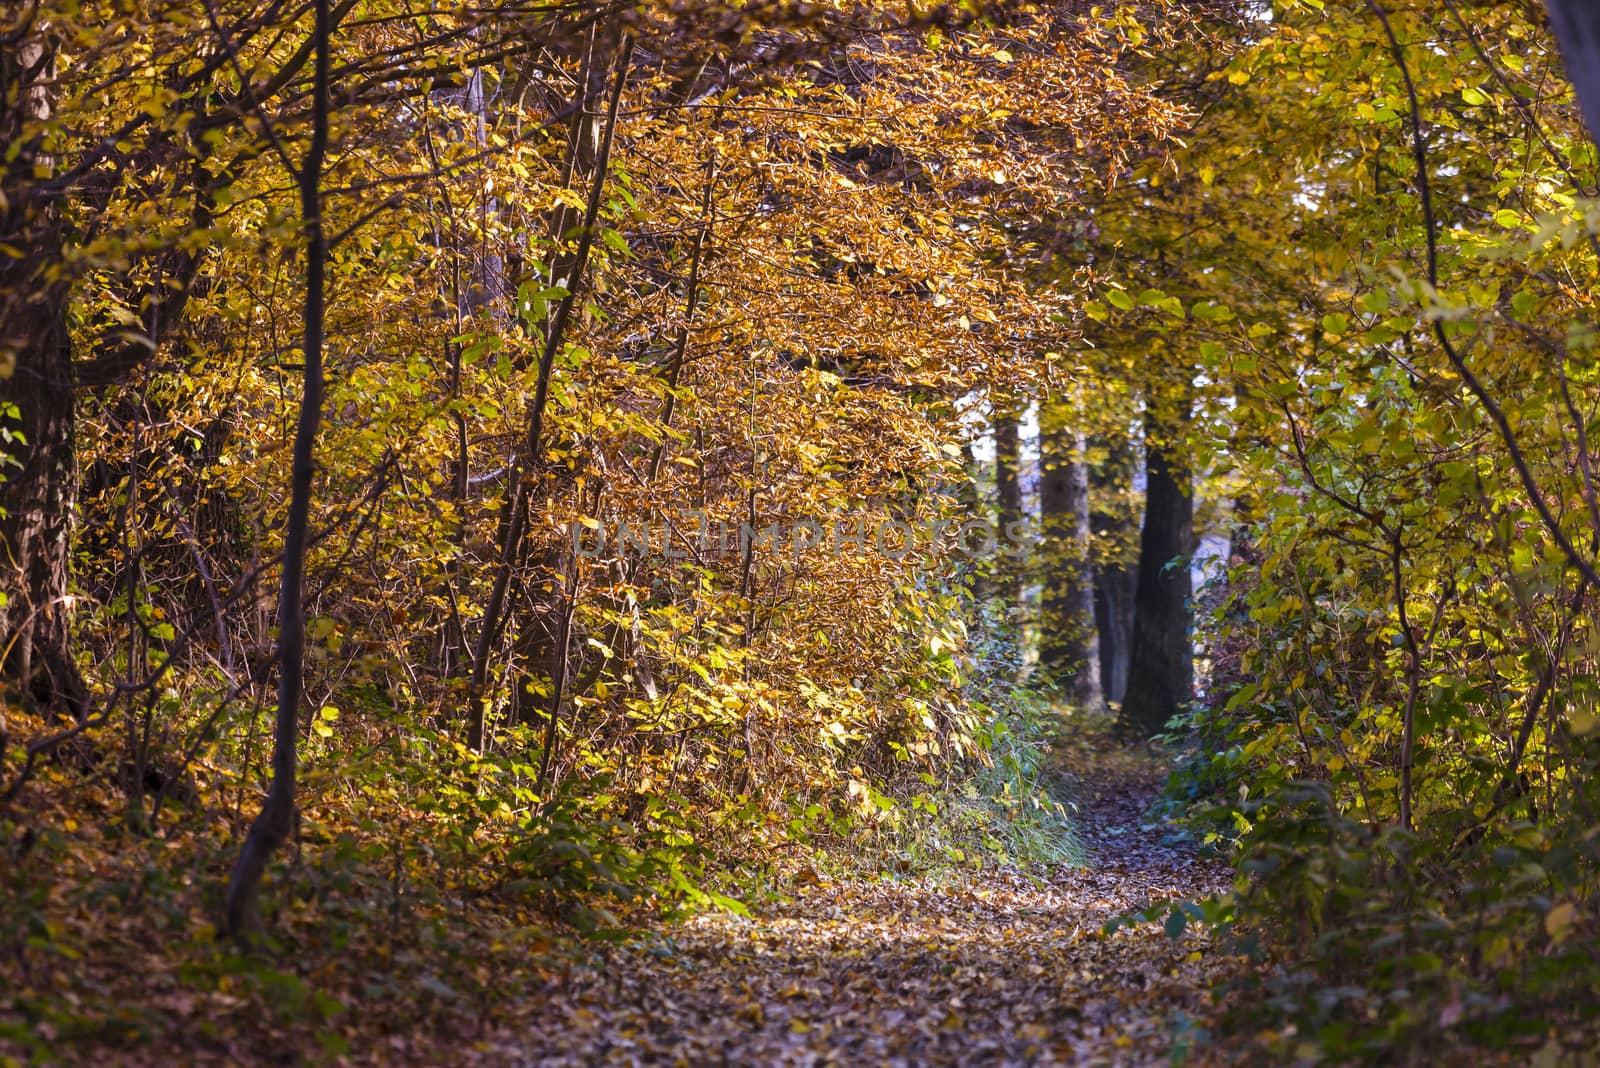 Autumn foliage in yellow, red and brown colors fills a path through the woods